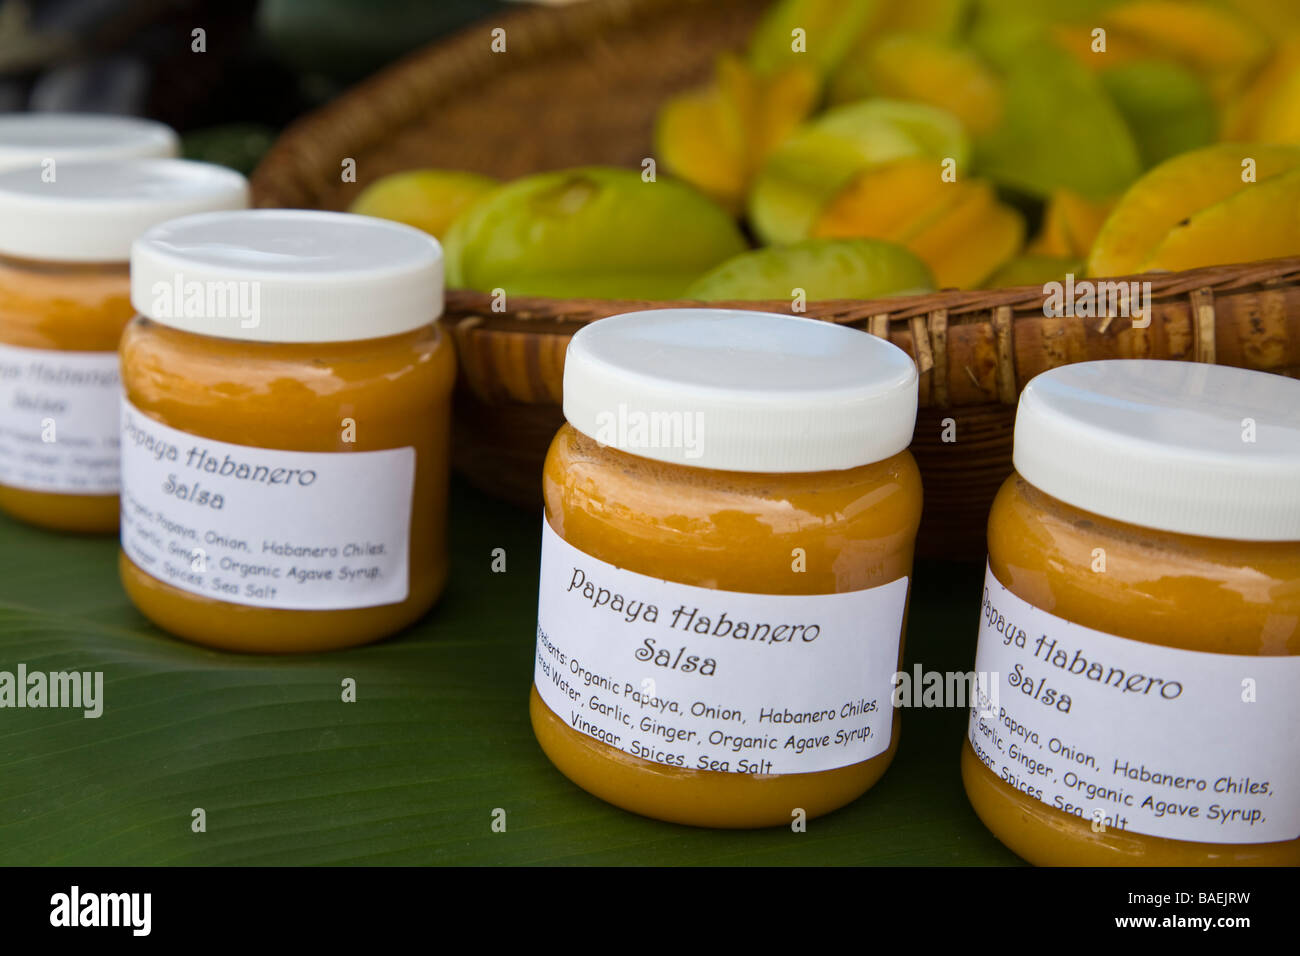 MEXICO Todos Santos Roadside stand selling organic fruits and vegetables in small Mexican town jars of papaya habanero salsa Stock Photo